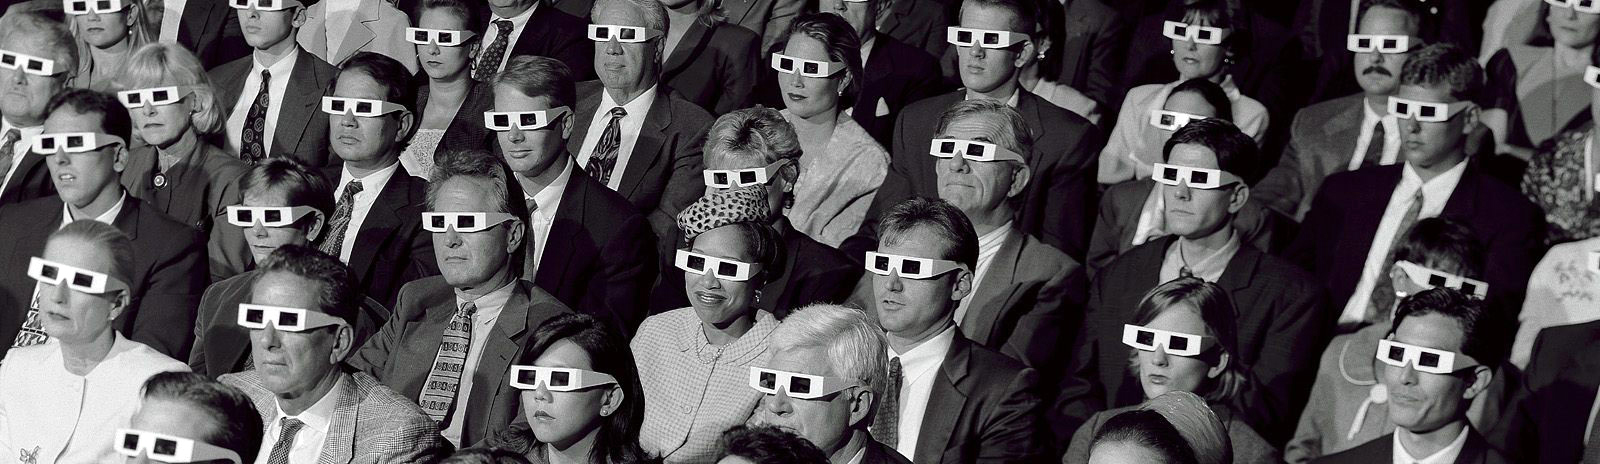 audience-with-3d-glasses 3